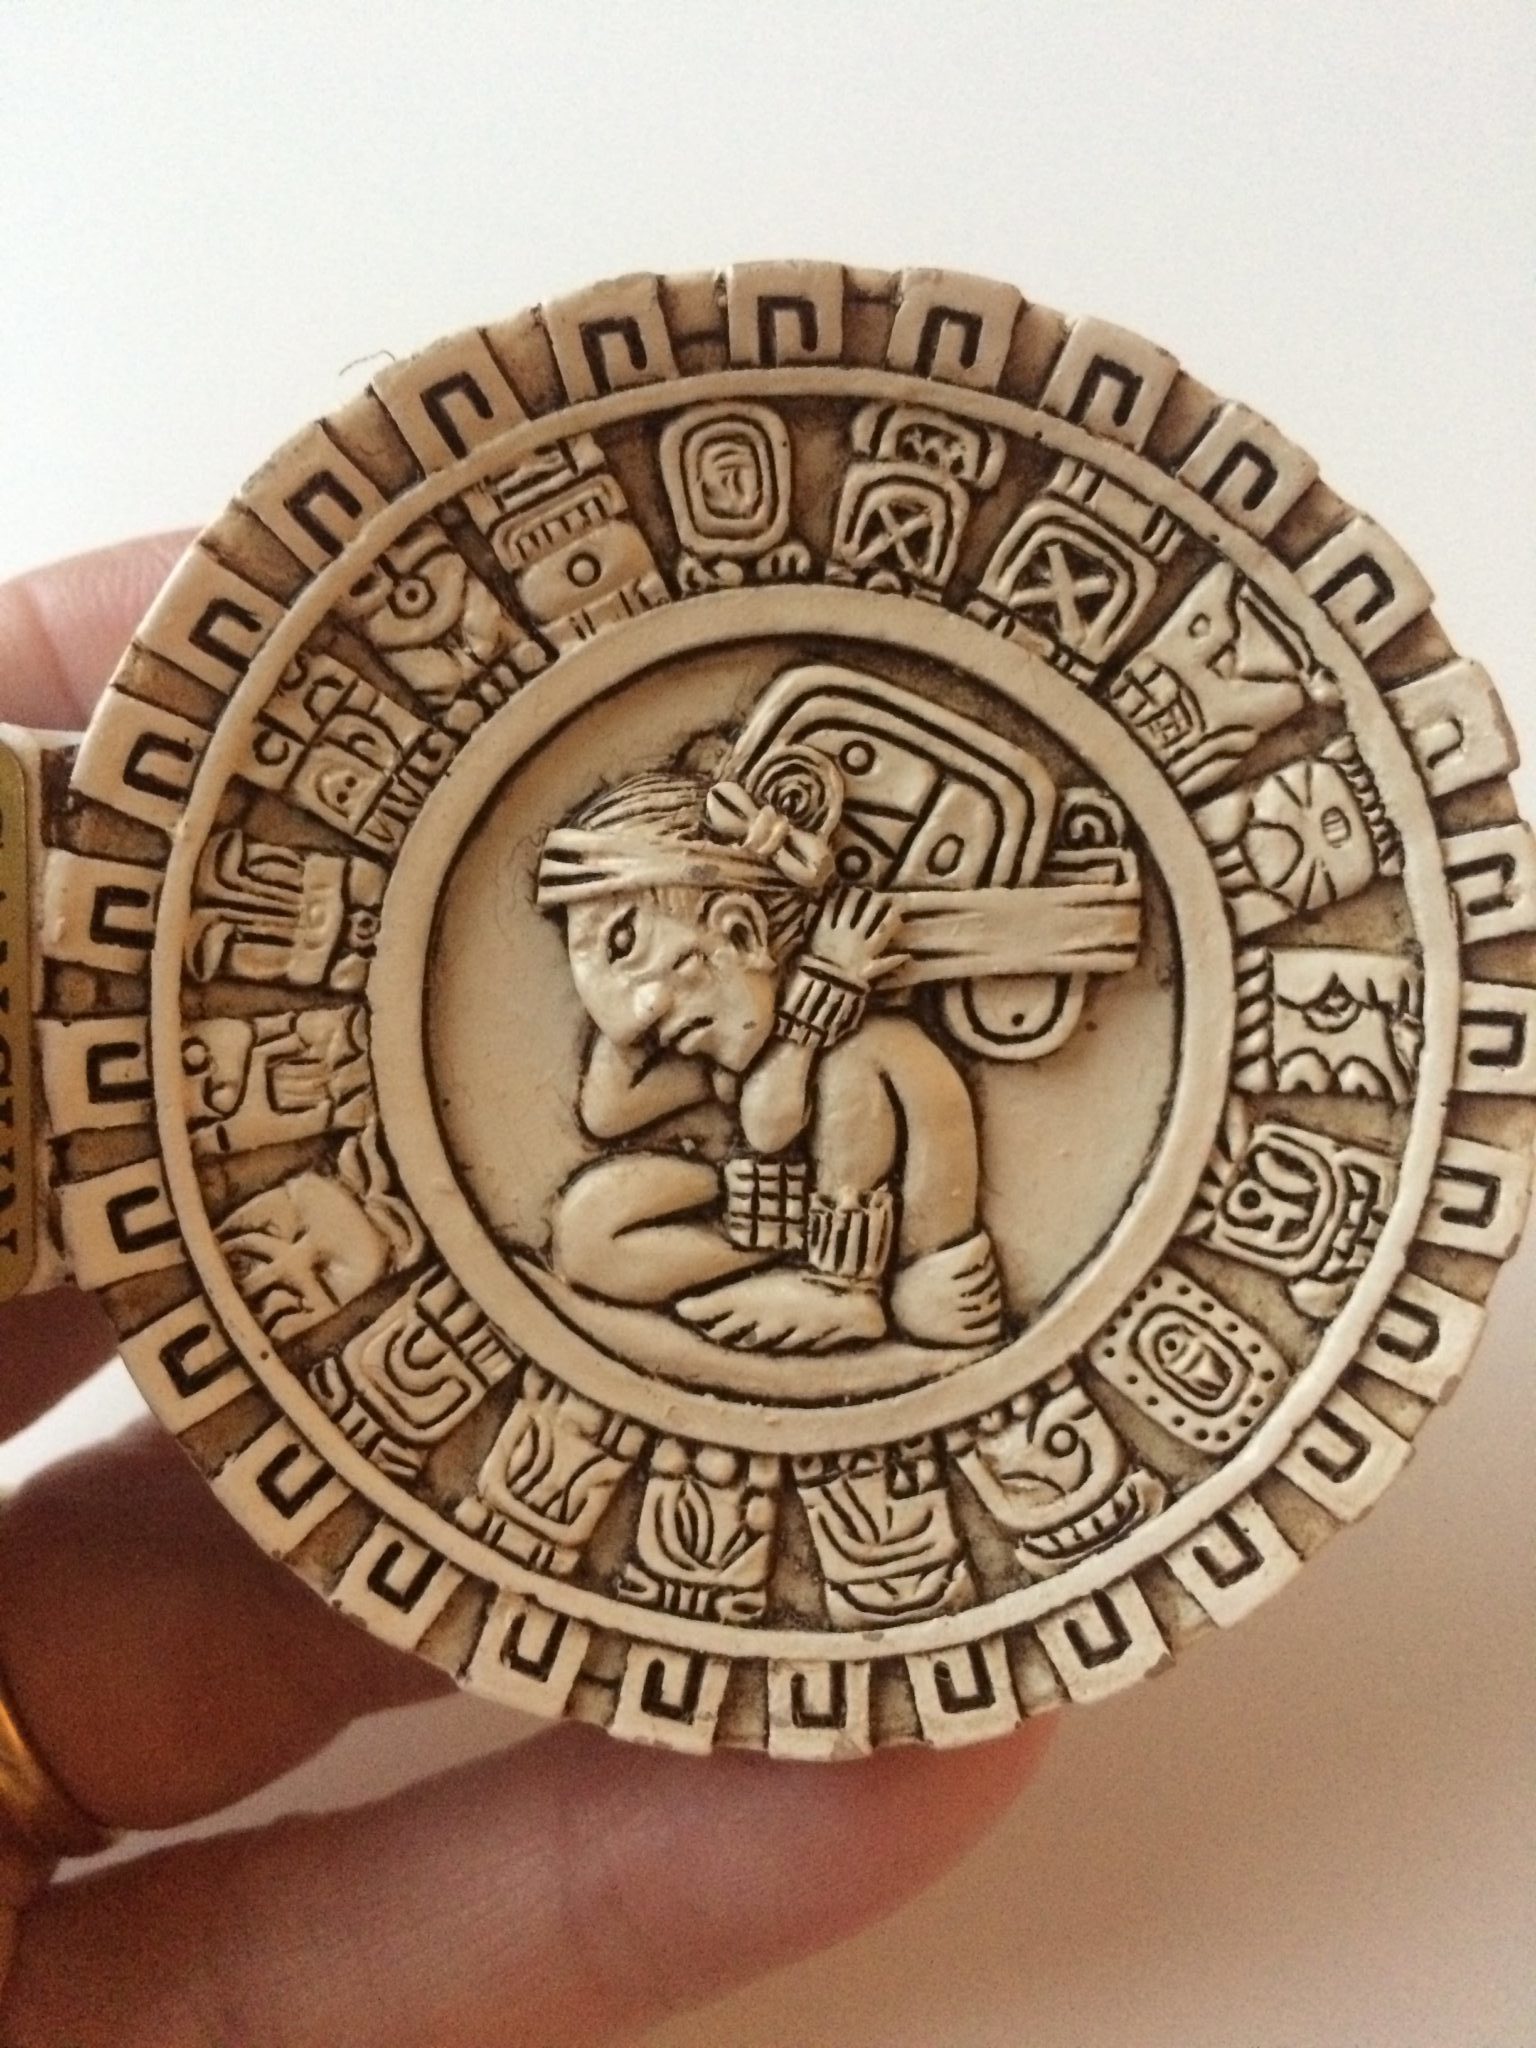 What Astrologers need to know about the Mayan Long Count calendar